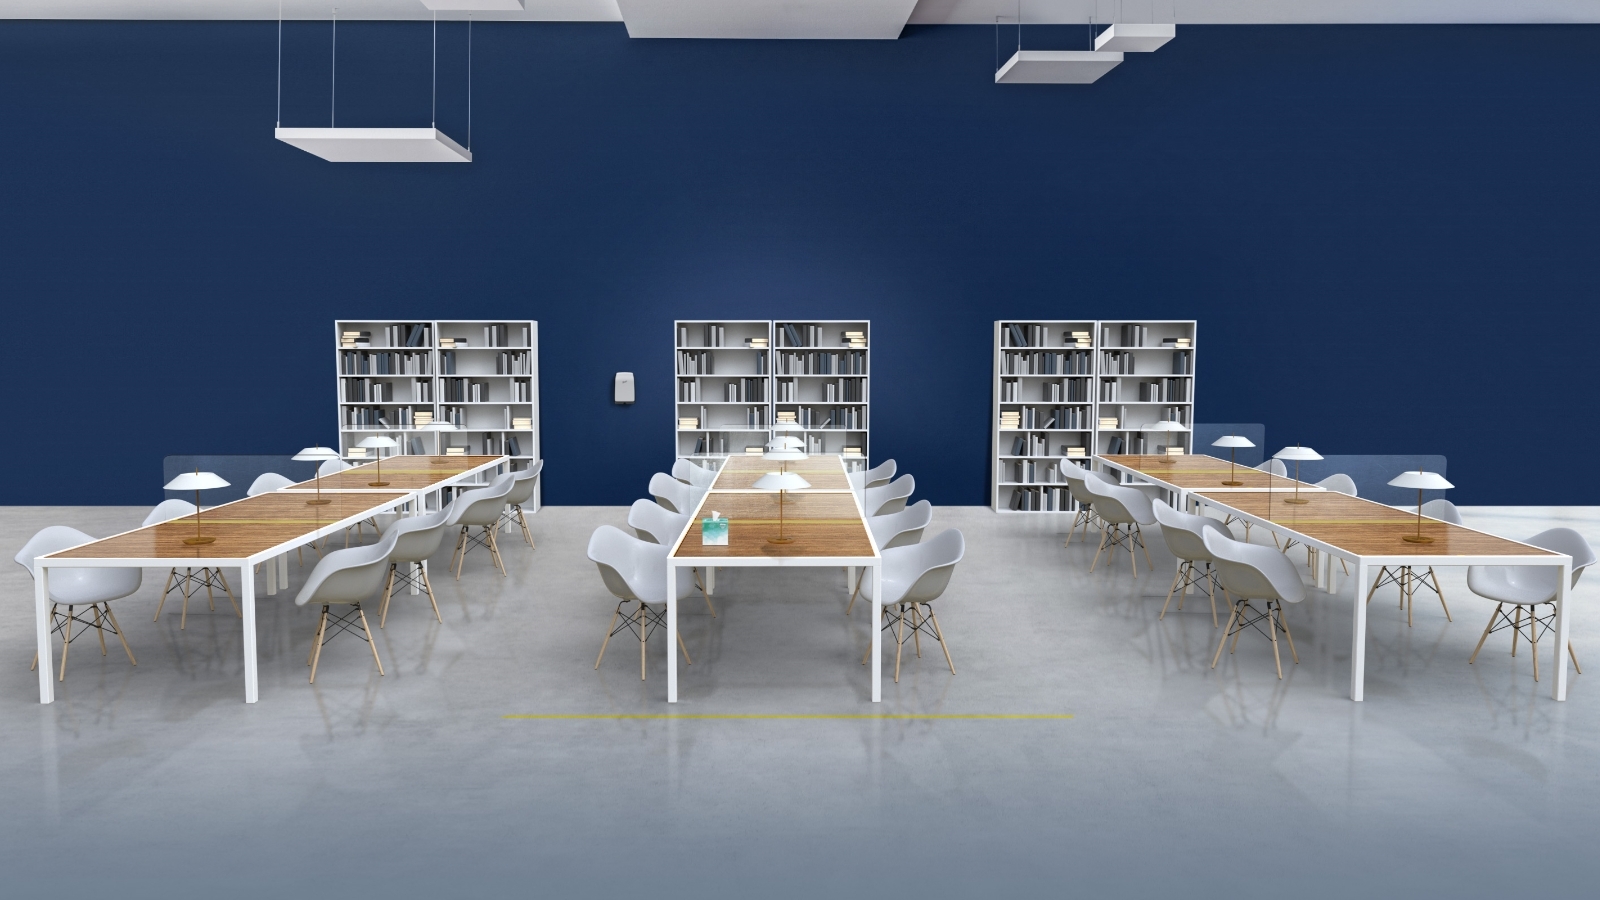 Rows of reading tables in library setting